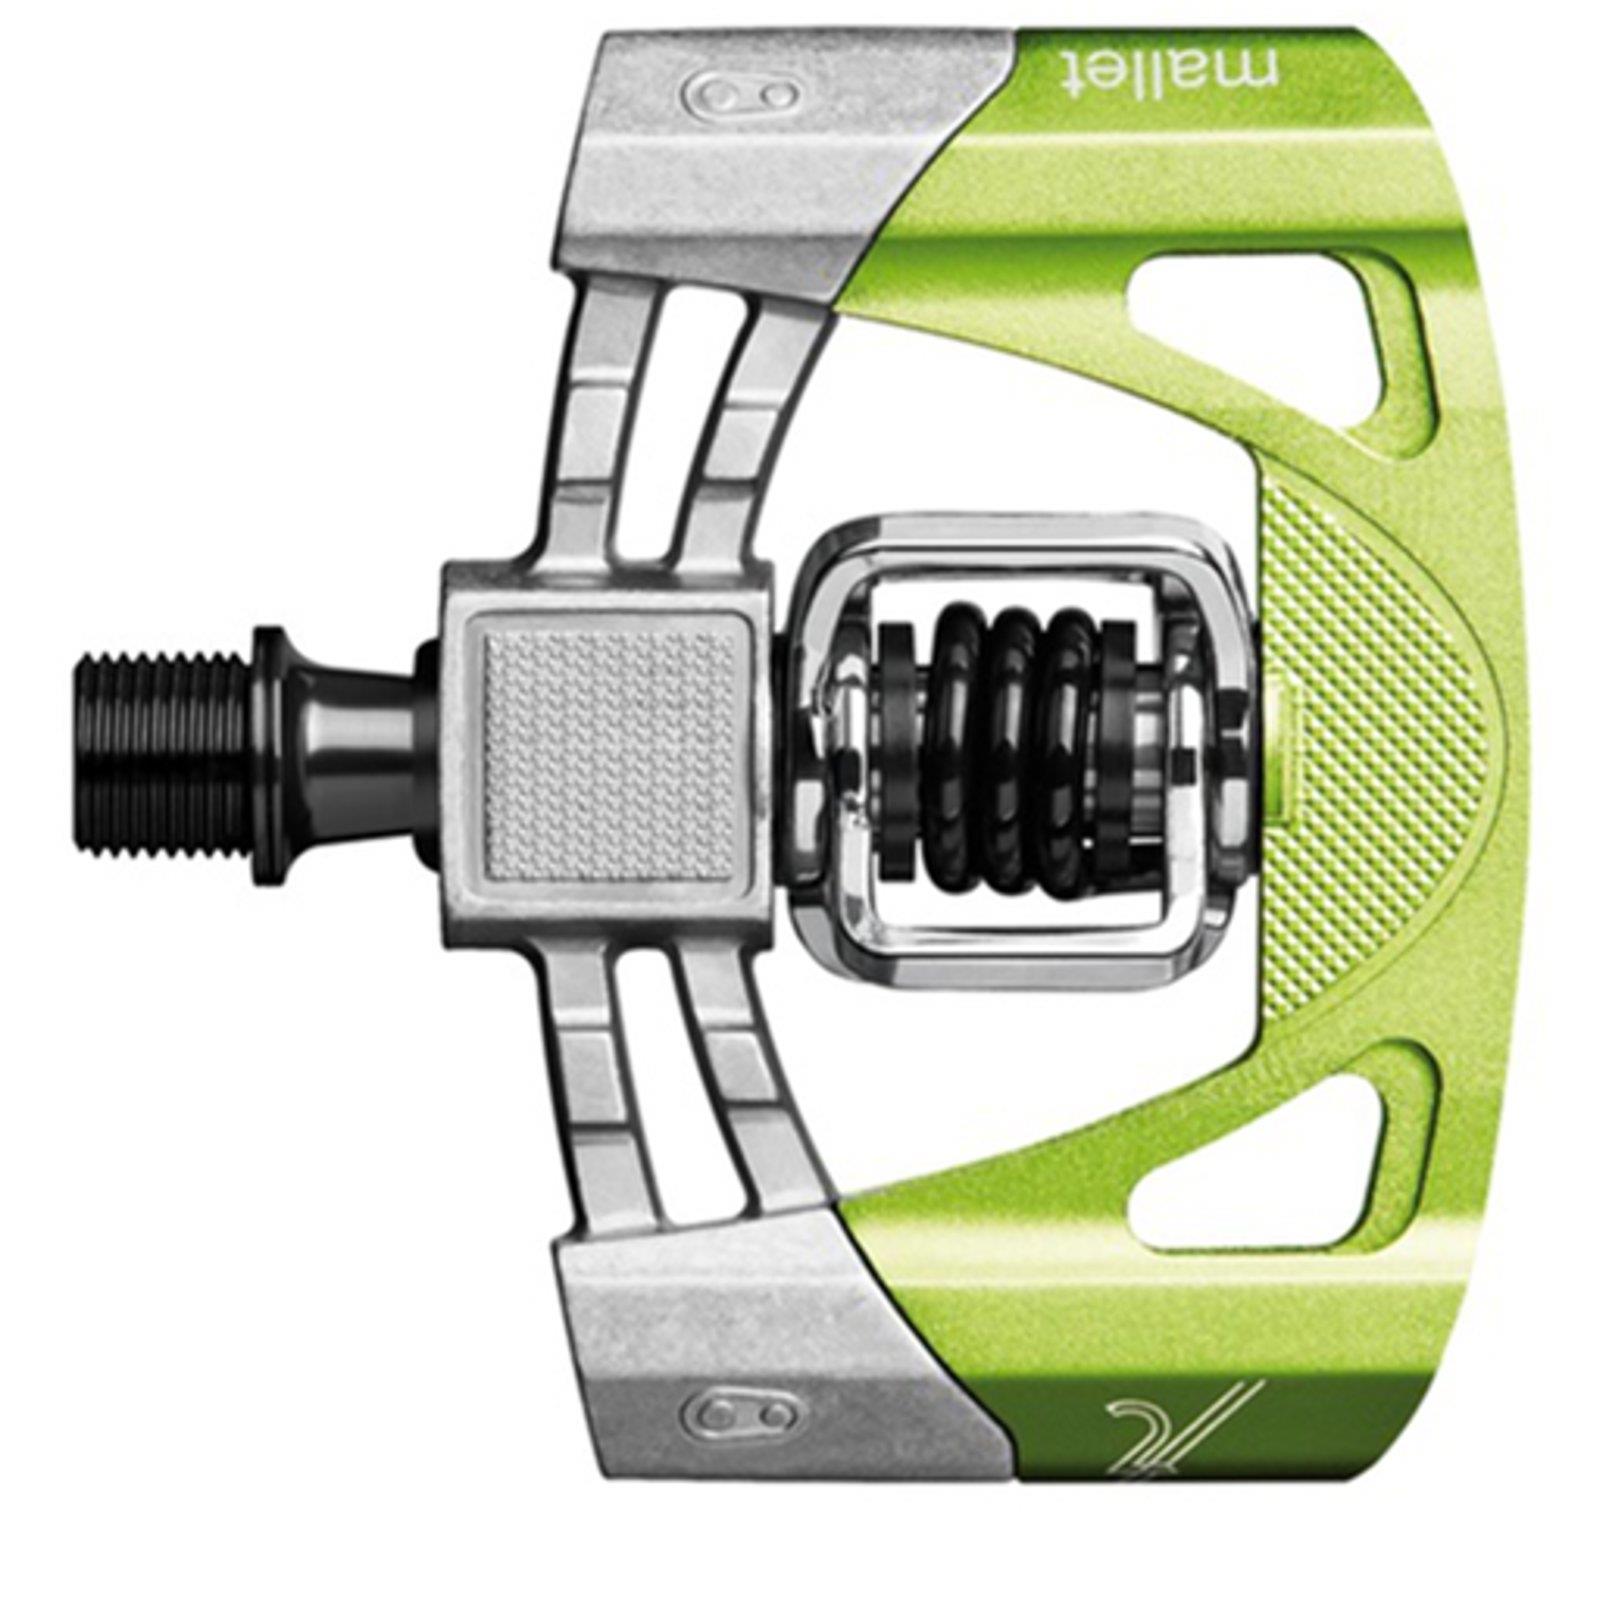 Crankbrothers Downhill Systempedale Mallet 3 Fahrrad Flat Pedale Fahrradpedale